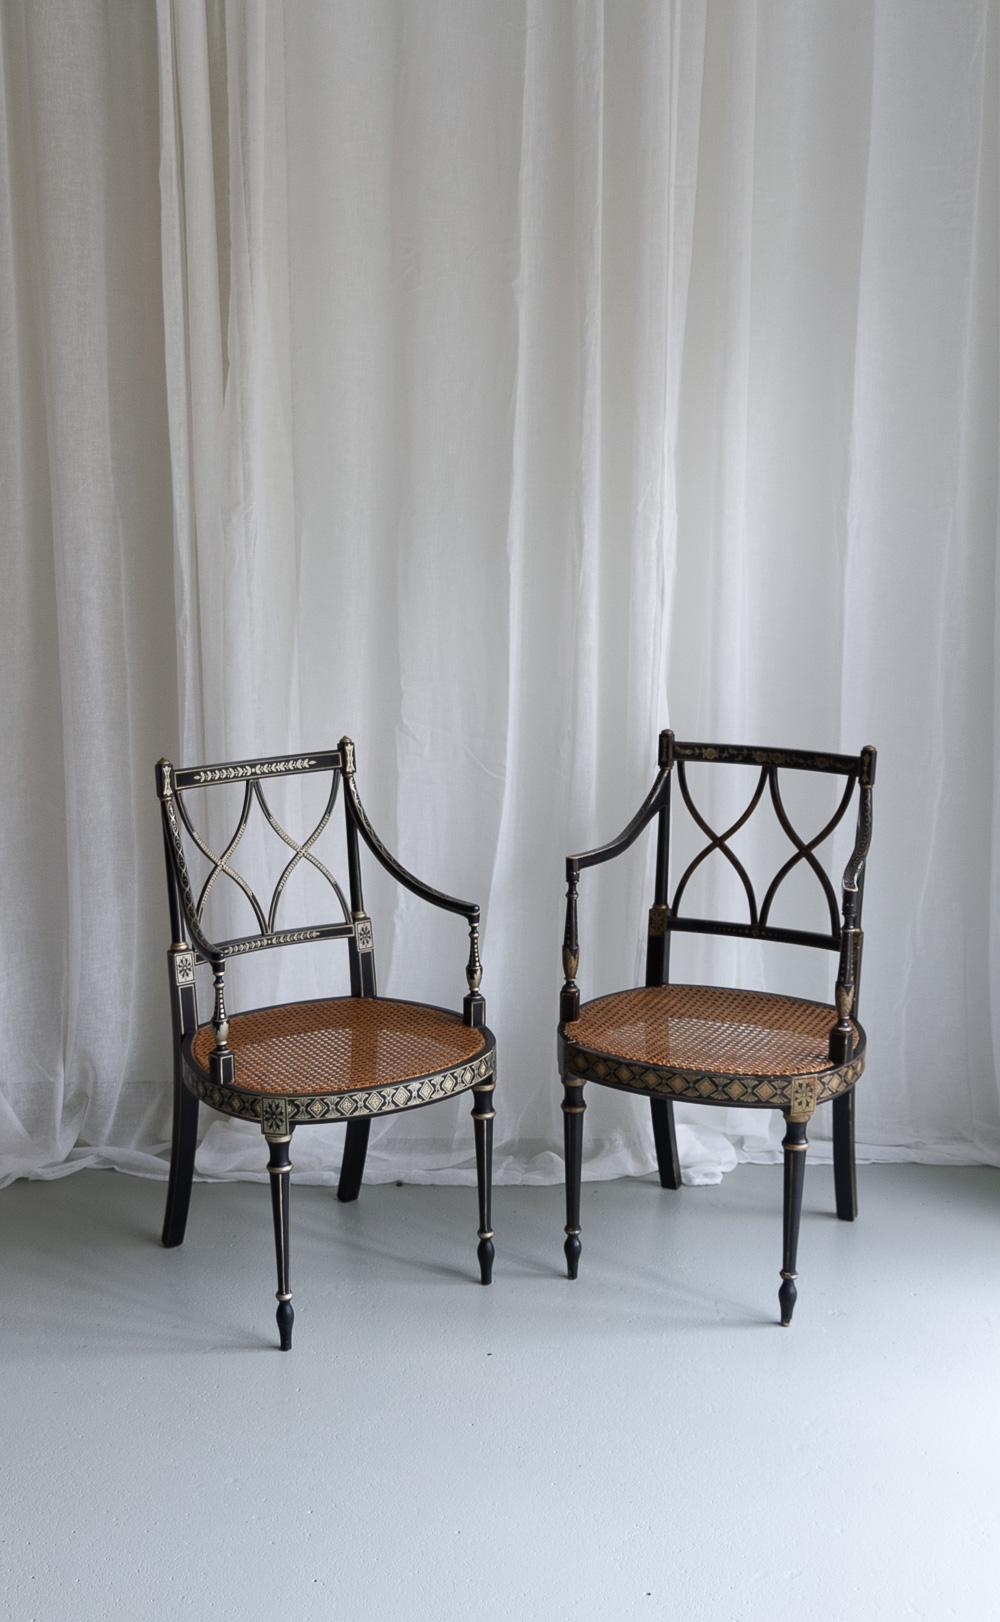 Regency Style Ebonized Cane Armchairs, Set of 2.
Pair of English Regency style black lacquered chairs with caned seat and hand painted gold motifs circa 1970s.
One chair has a bit more patina and a handwoven seat and therefore may be a bit